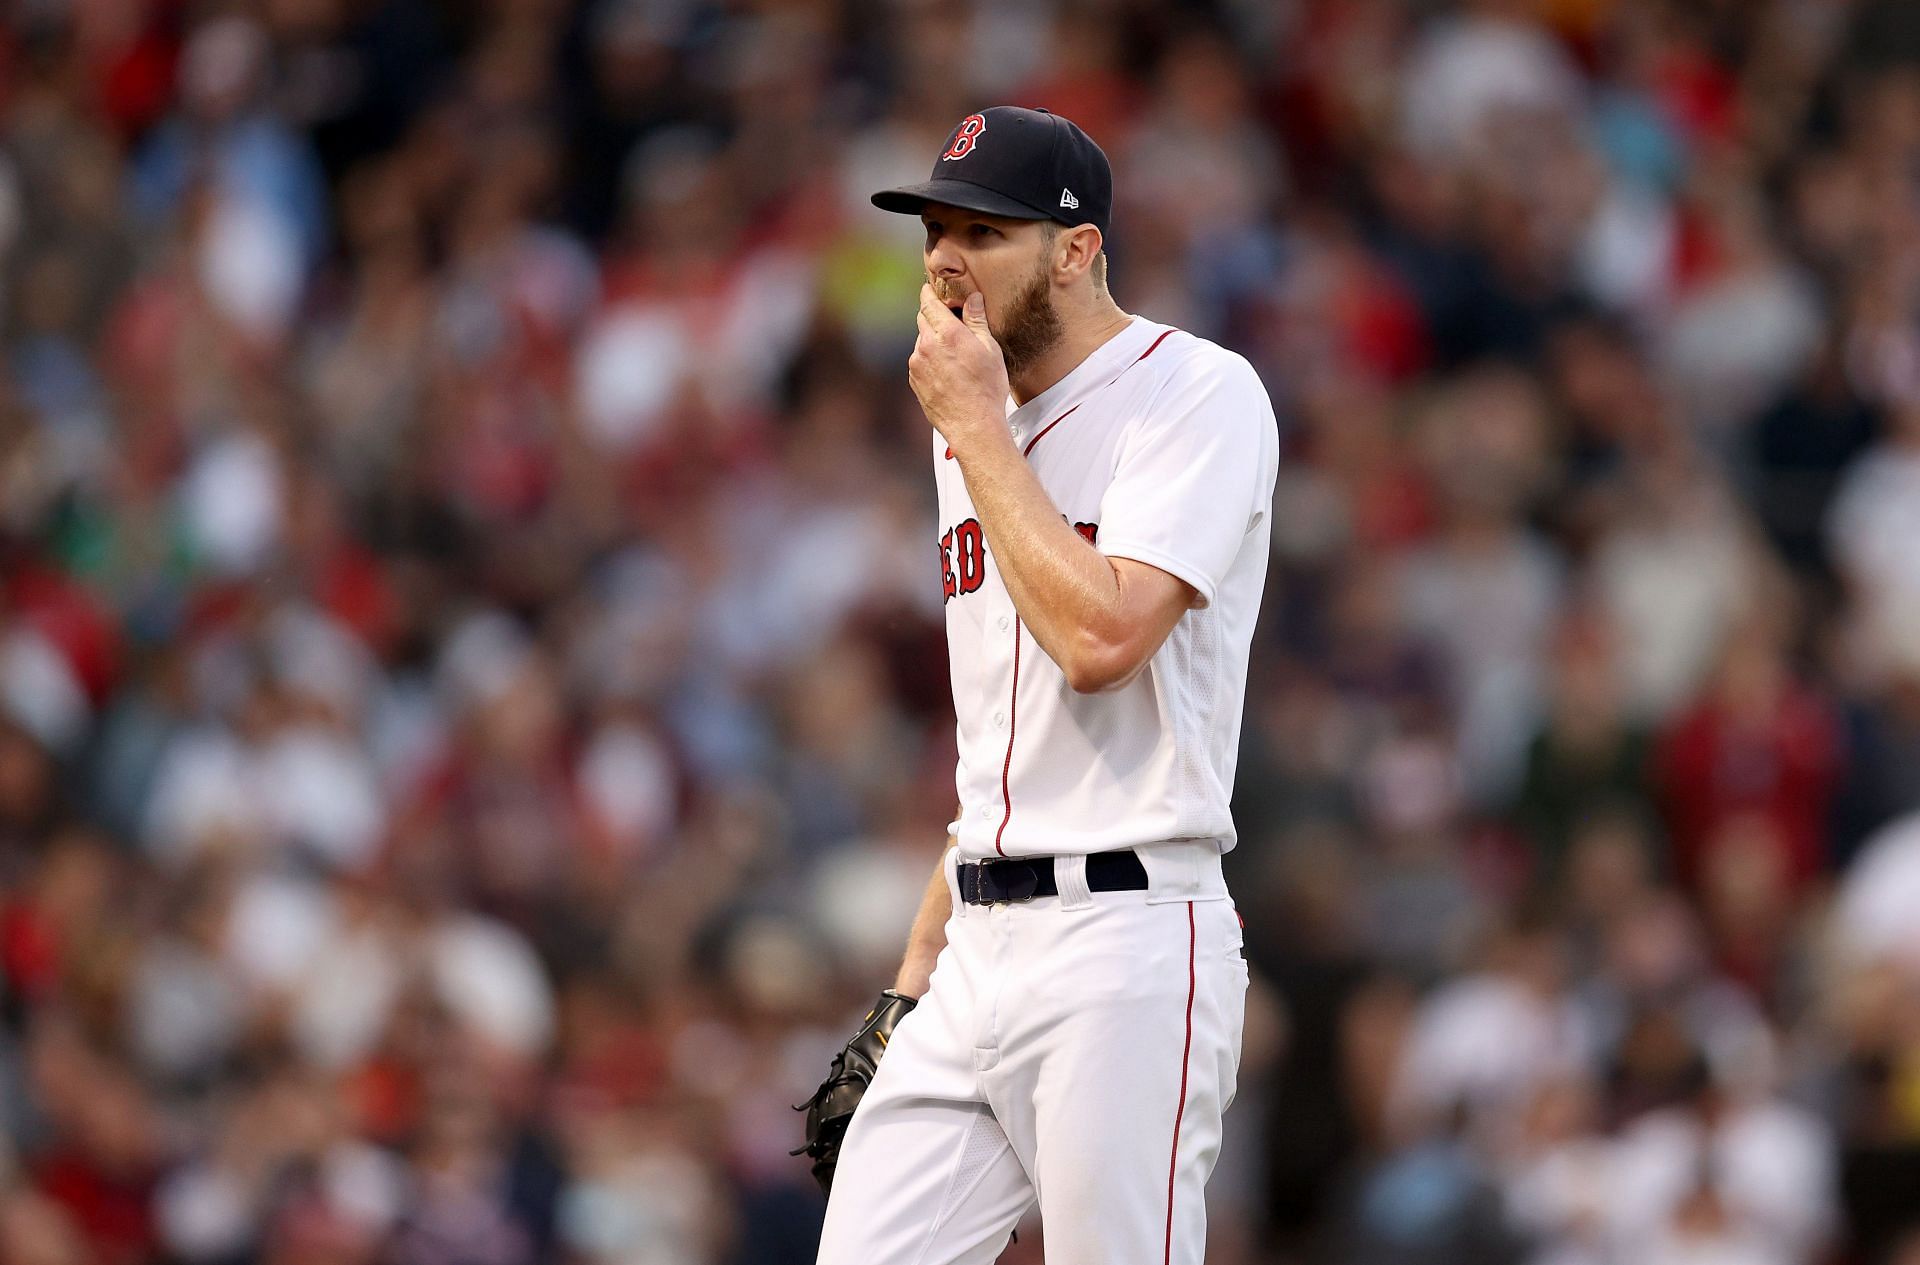 Red Sox: Chris Sale torched by Rays, fans online in latest bad start